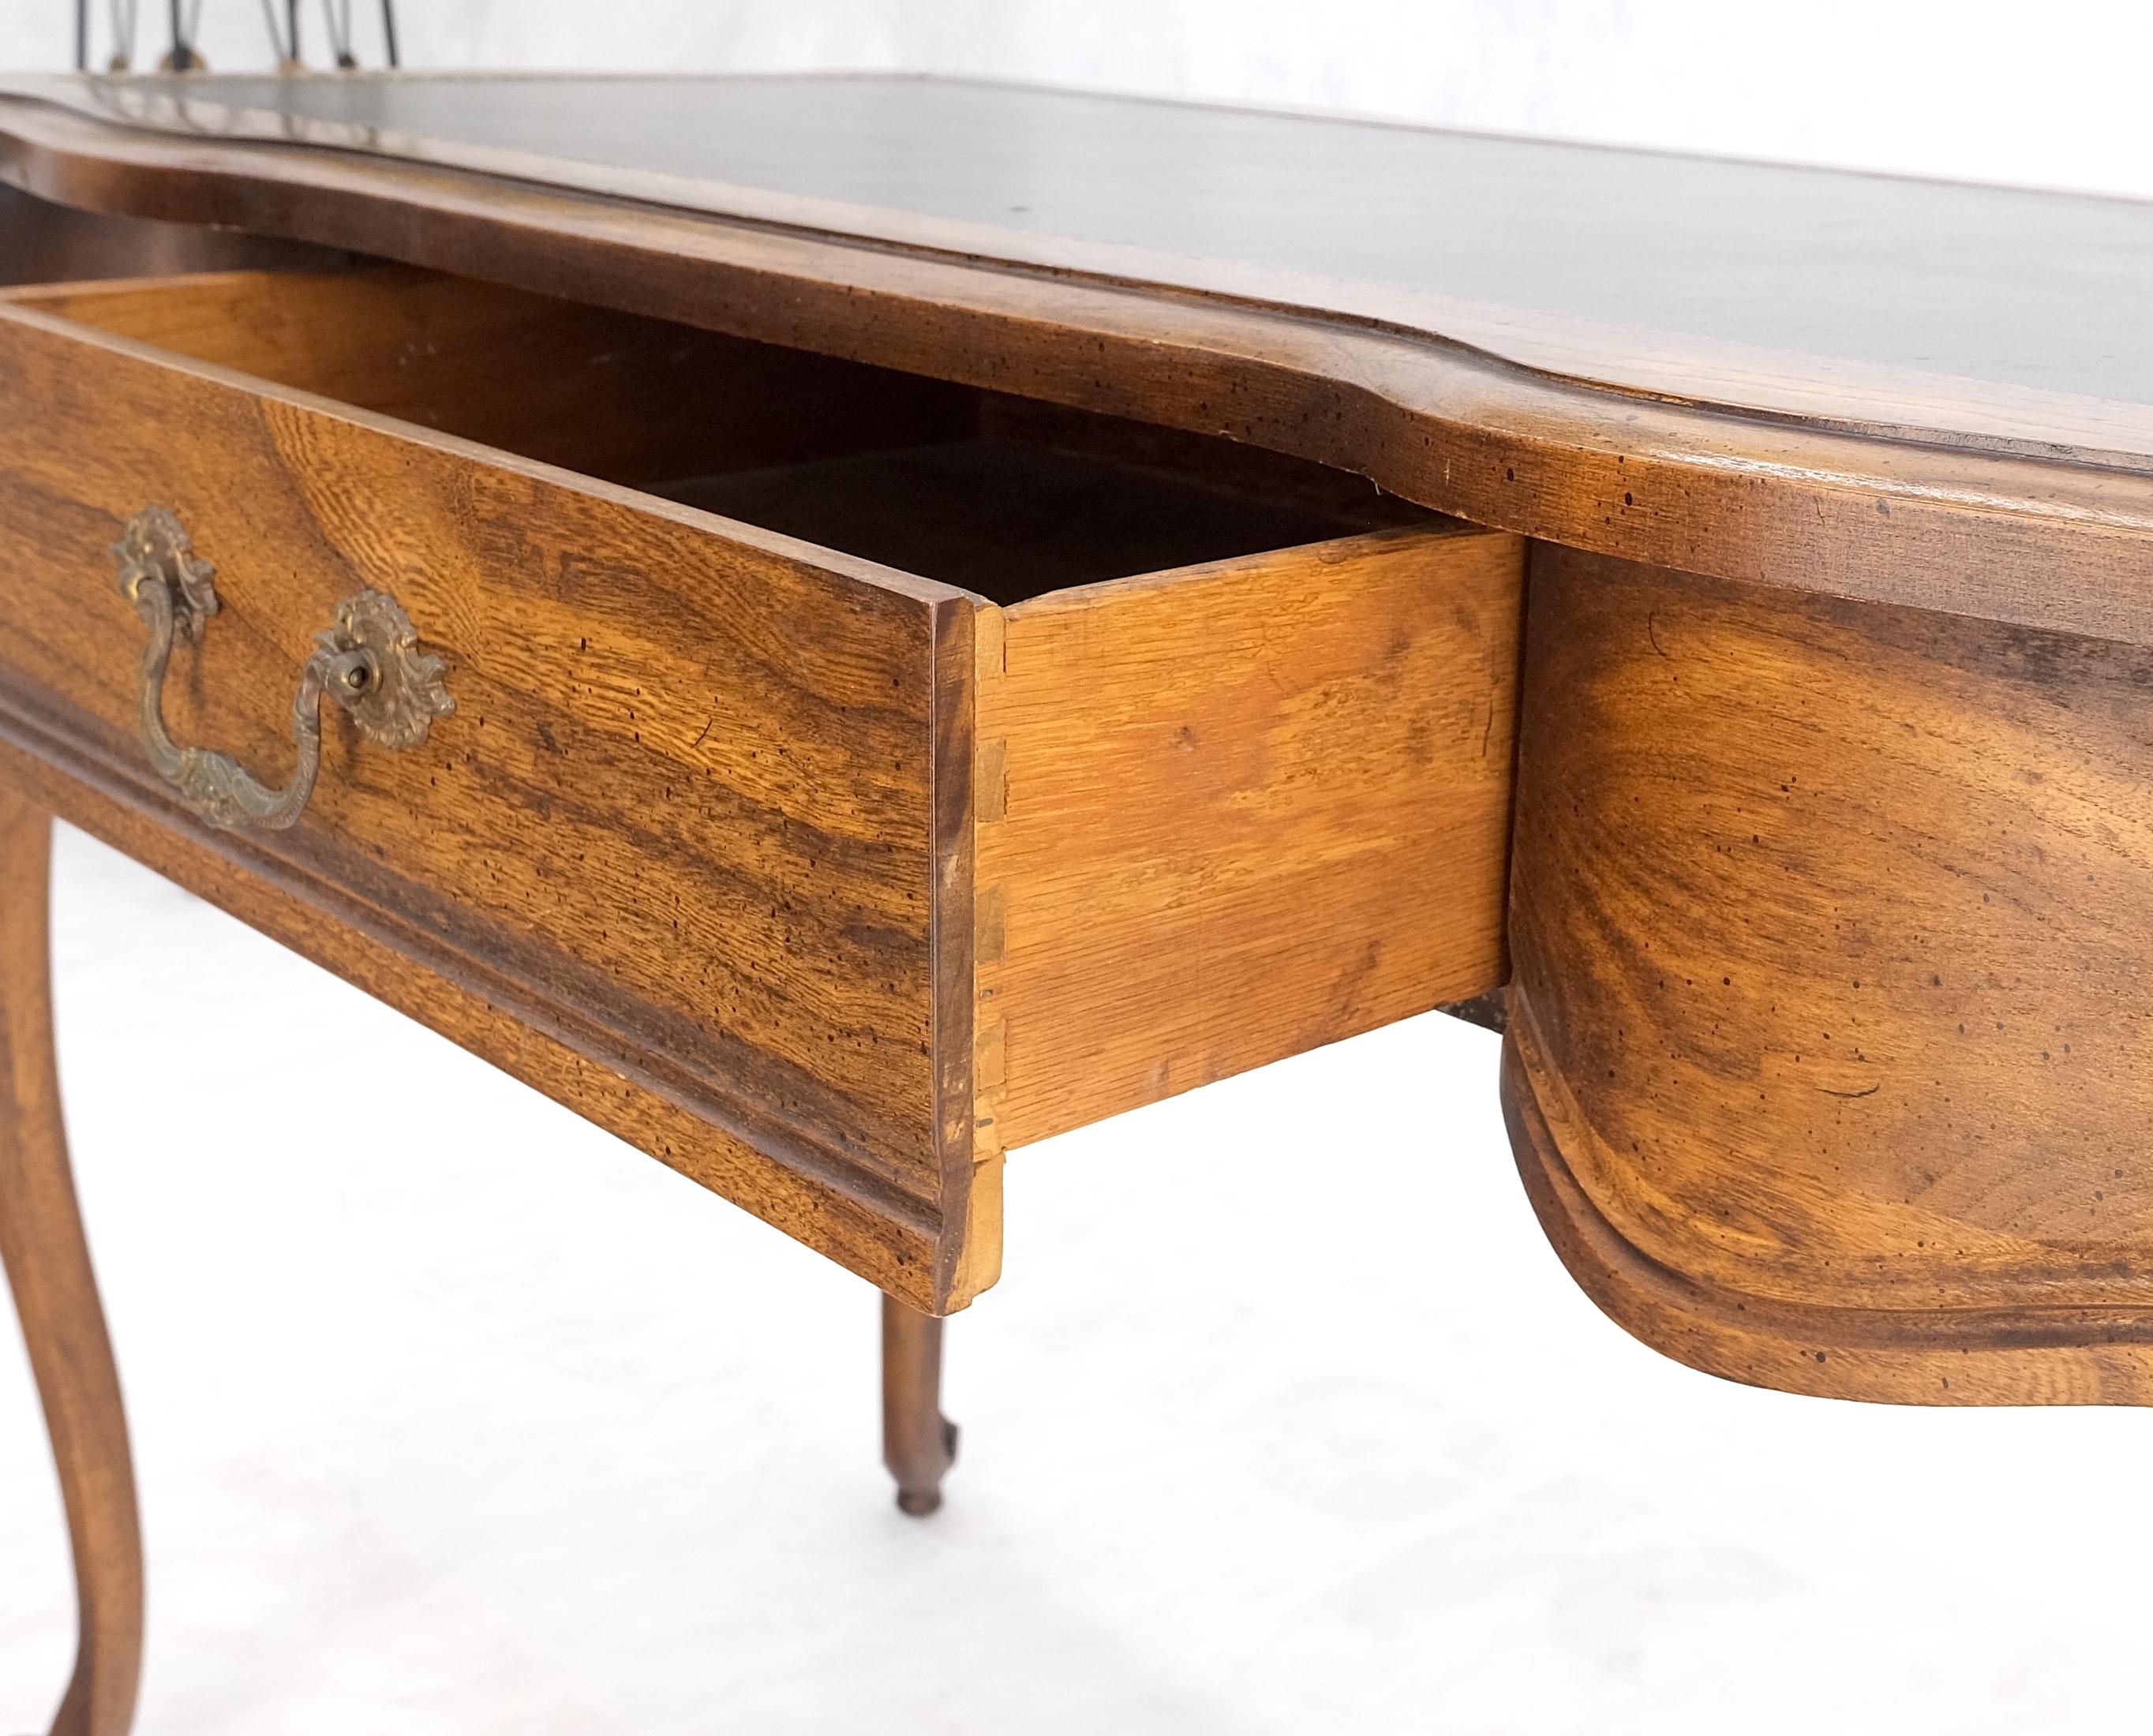 Small Black Leather Top One Drawer Cabriole Carved Leg Chestnut Desk Console  In Good Condition For Sale In Rockaway, NJ